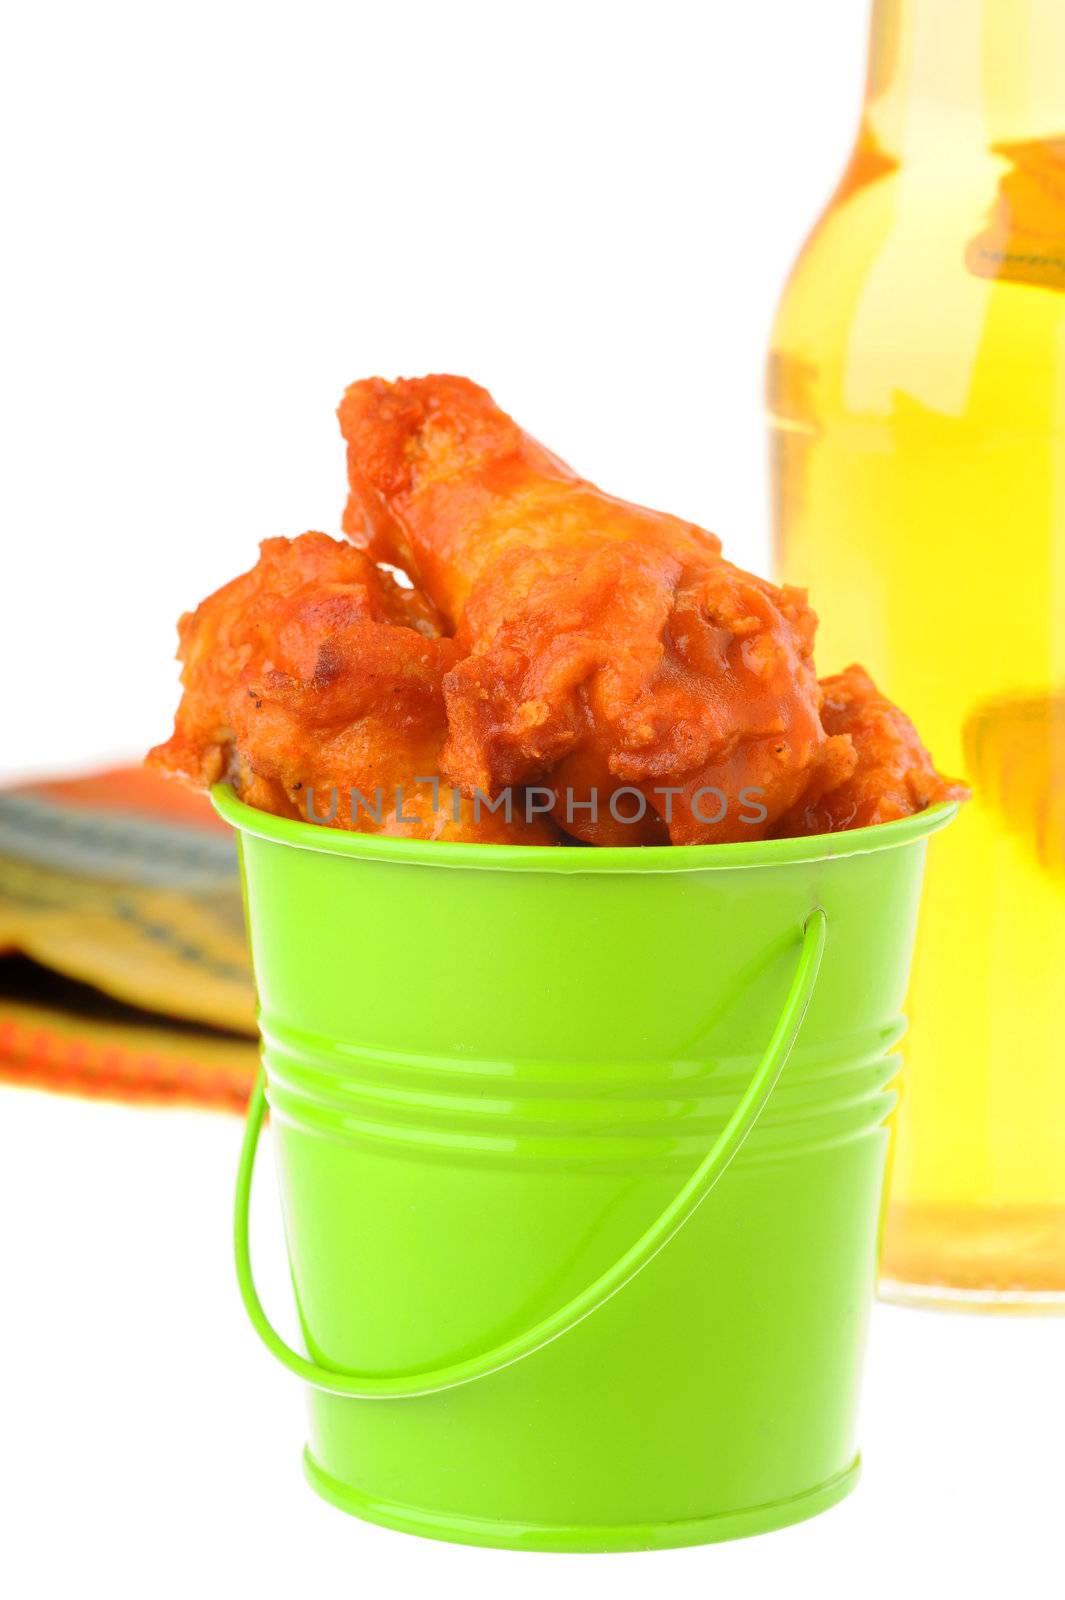 Bucket of hot and spicy chicken wings.